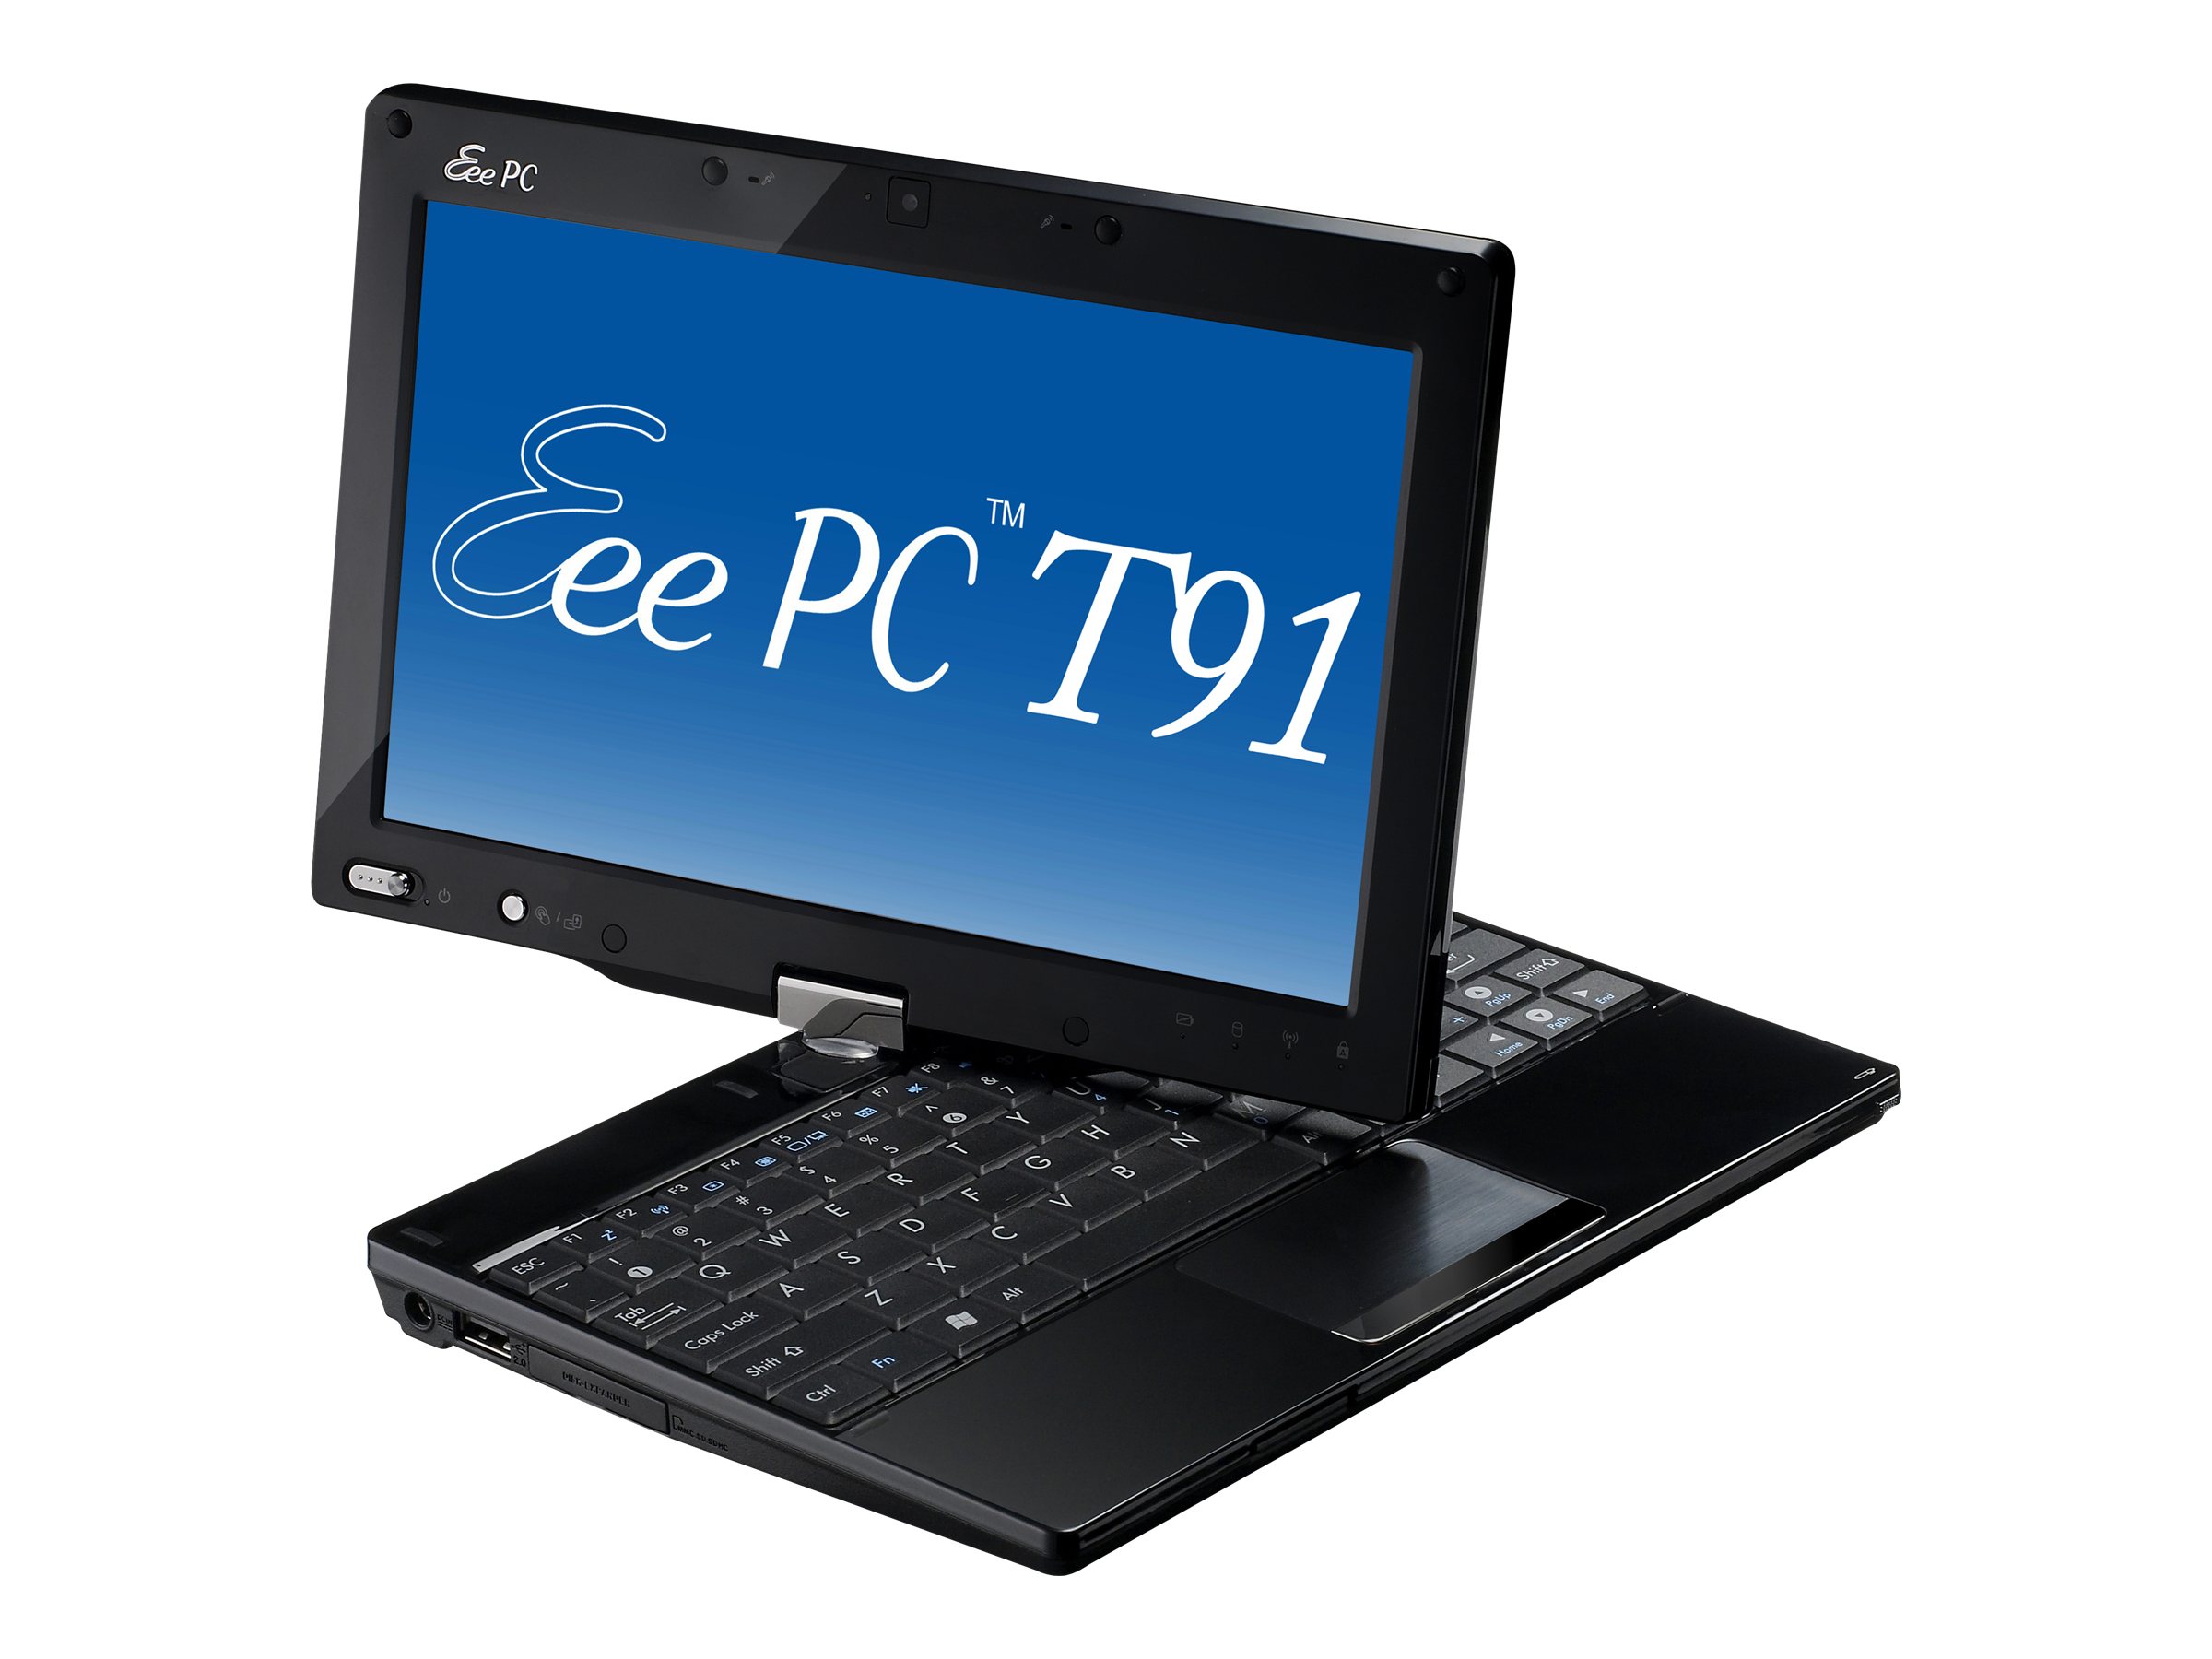 ASUS Eee PC T91MT - full details and